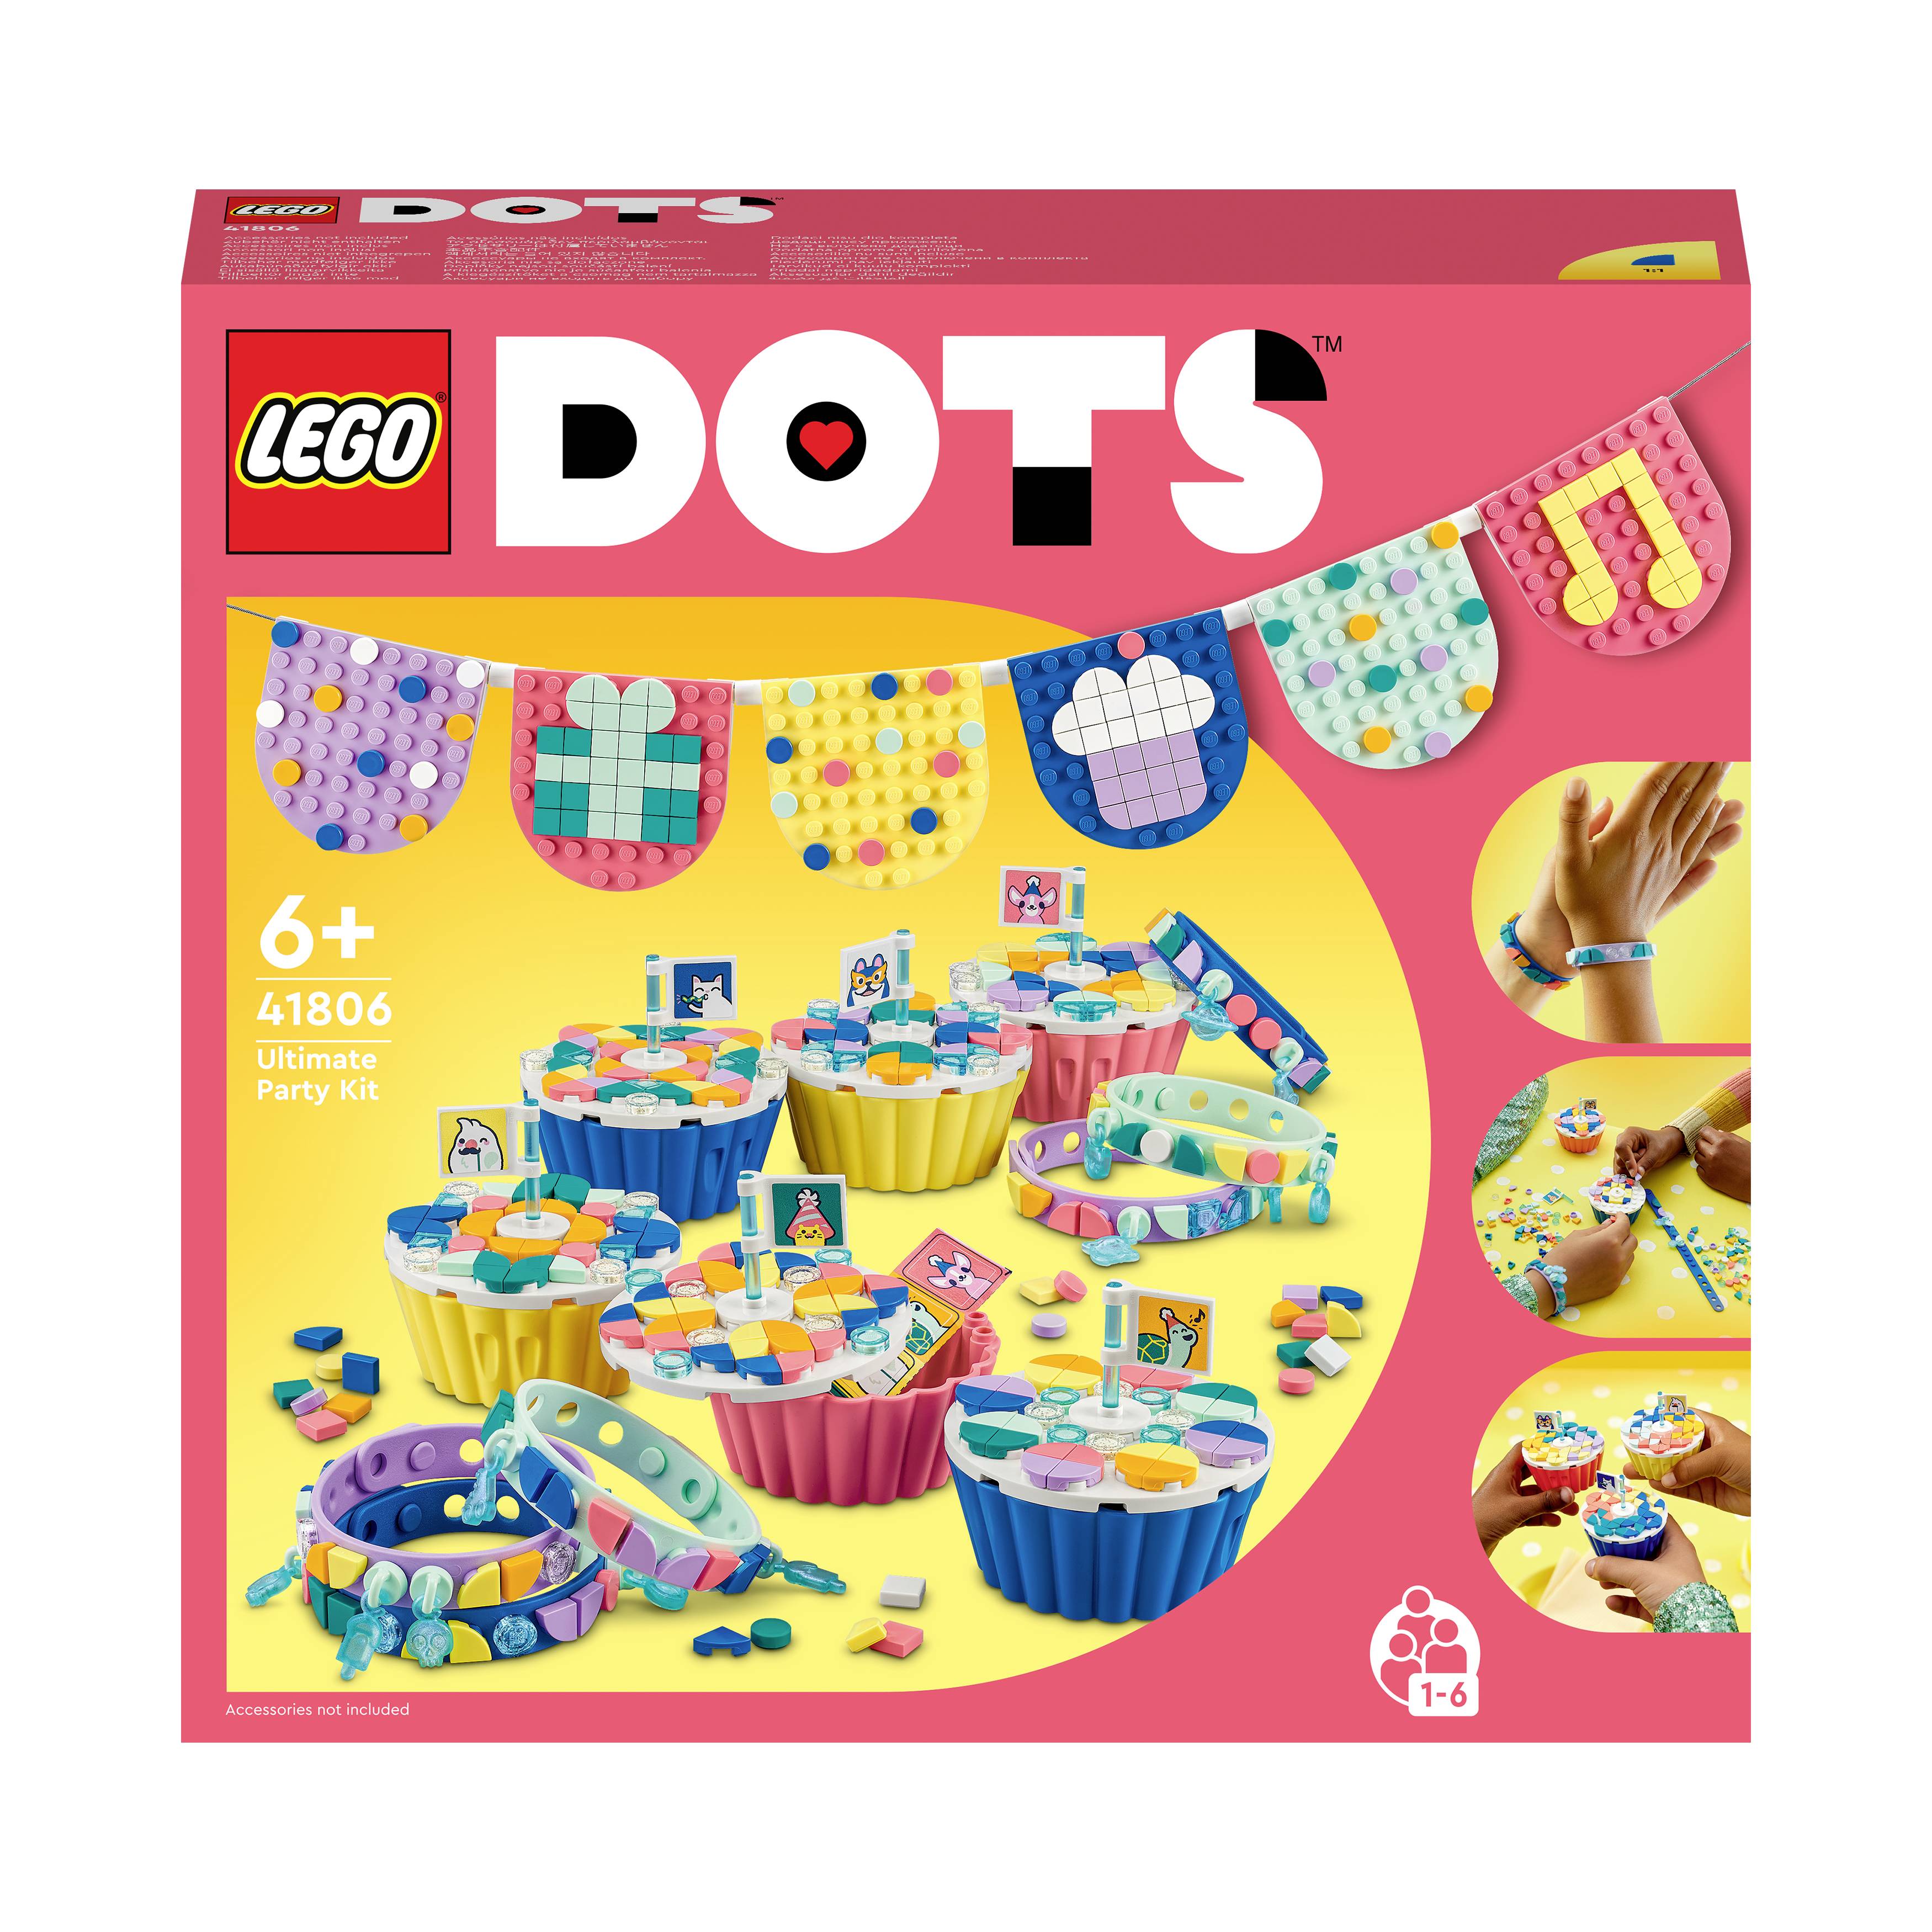 Lego Dots - Ultimate Party Kit